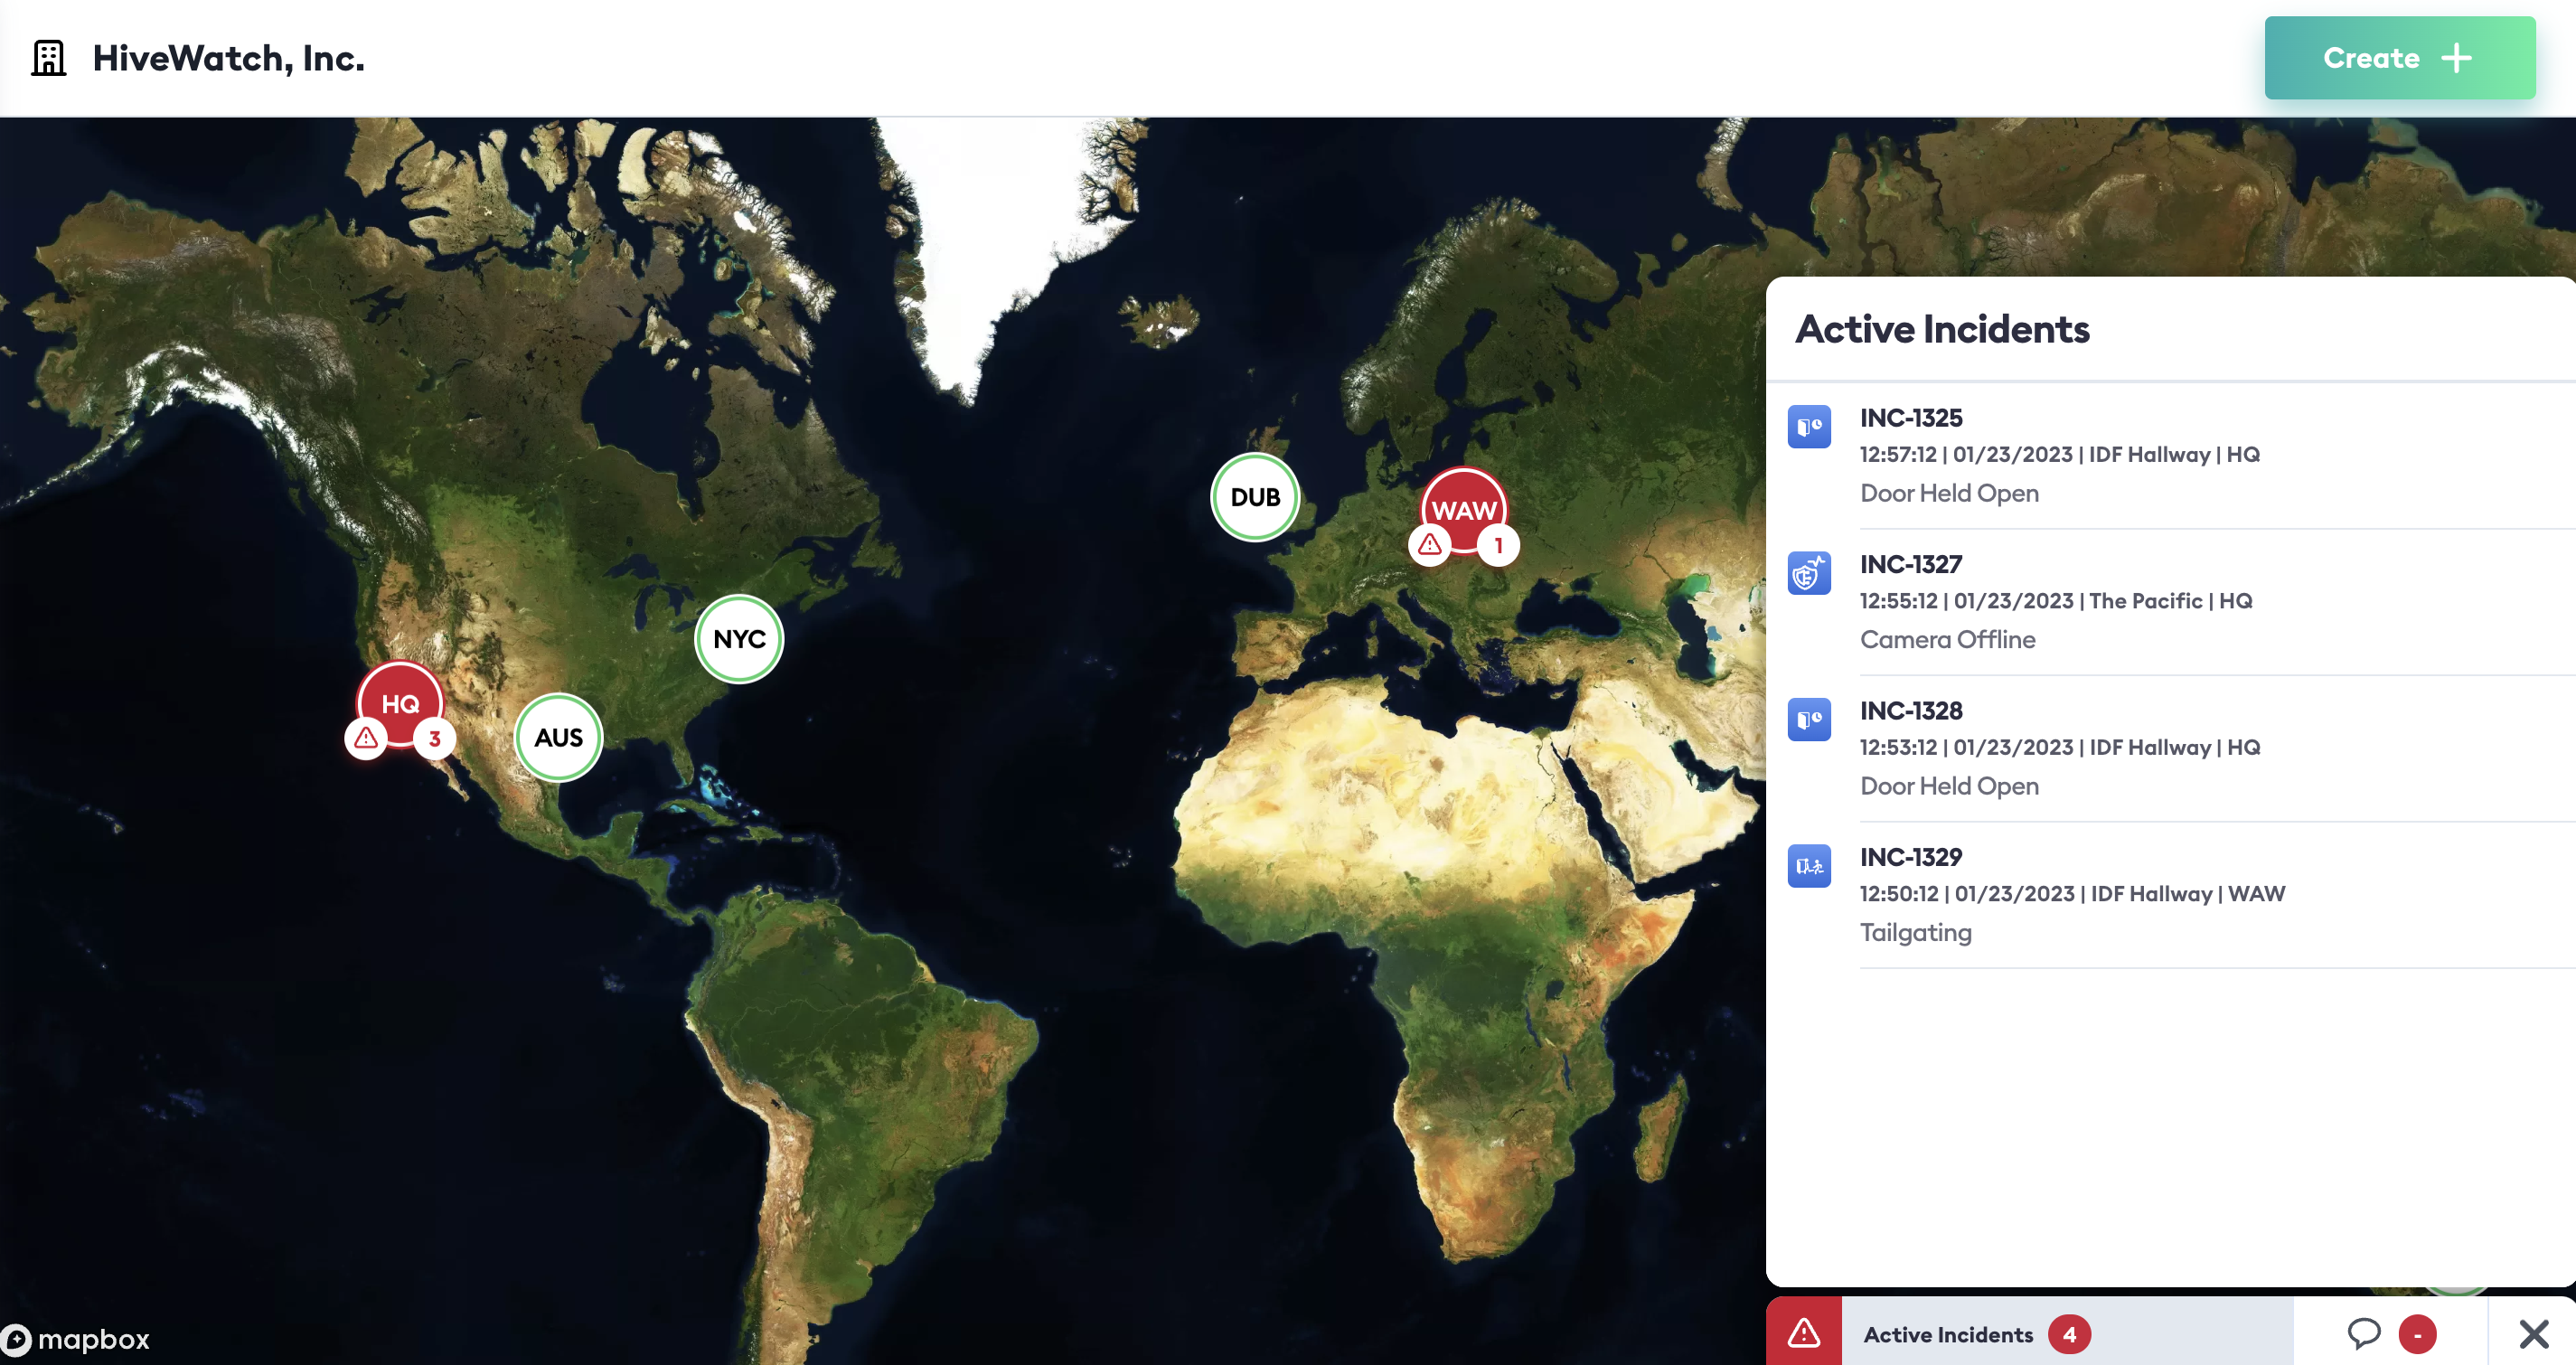 The HiveWatch® GSOC OS provides a global view of device health, incidents, and alerts in a comprehensive map view for better oversight, along with the ability to drill down by location seamlessly.